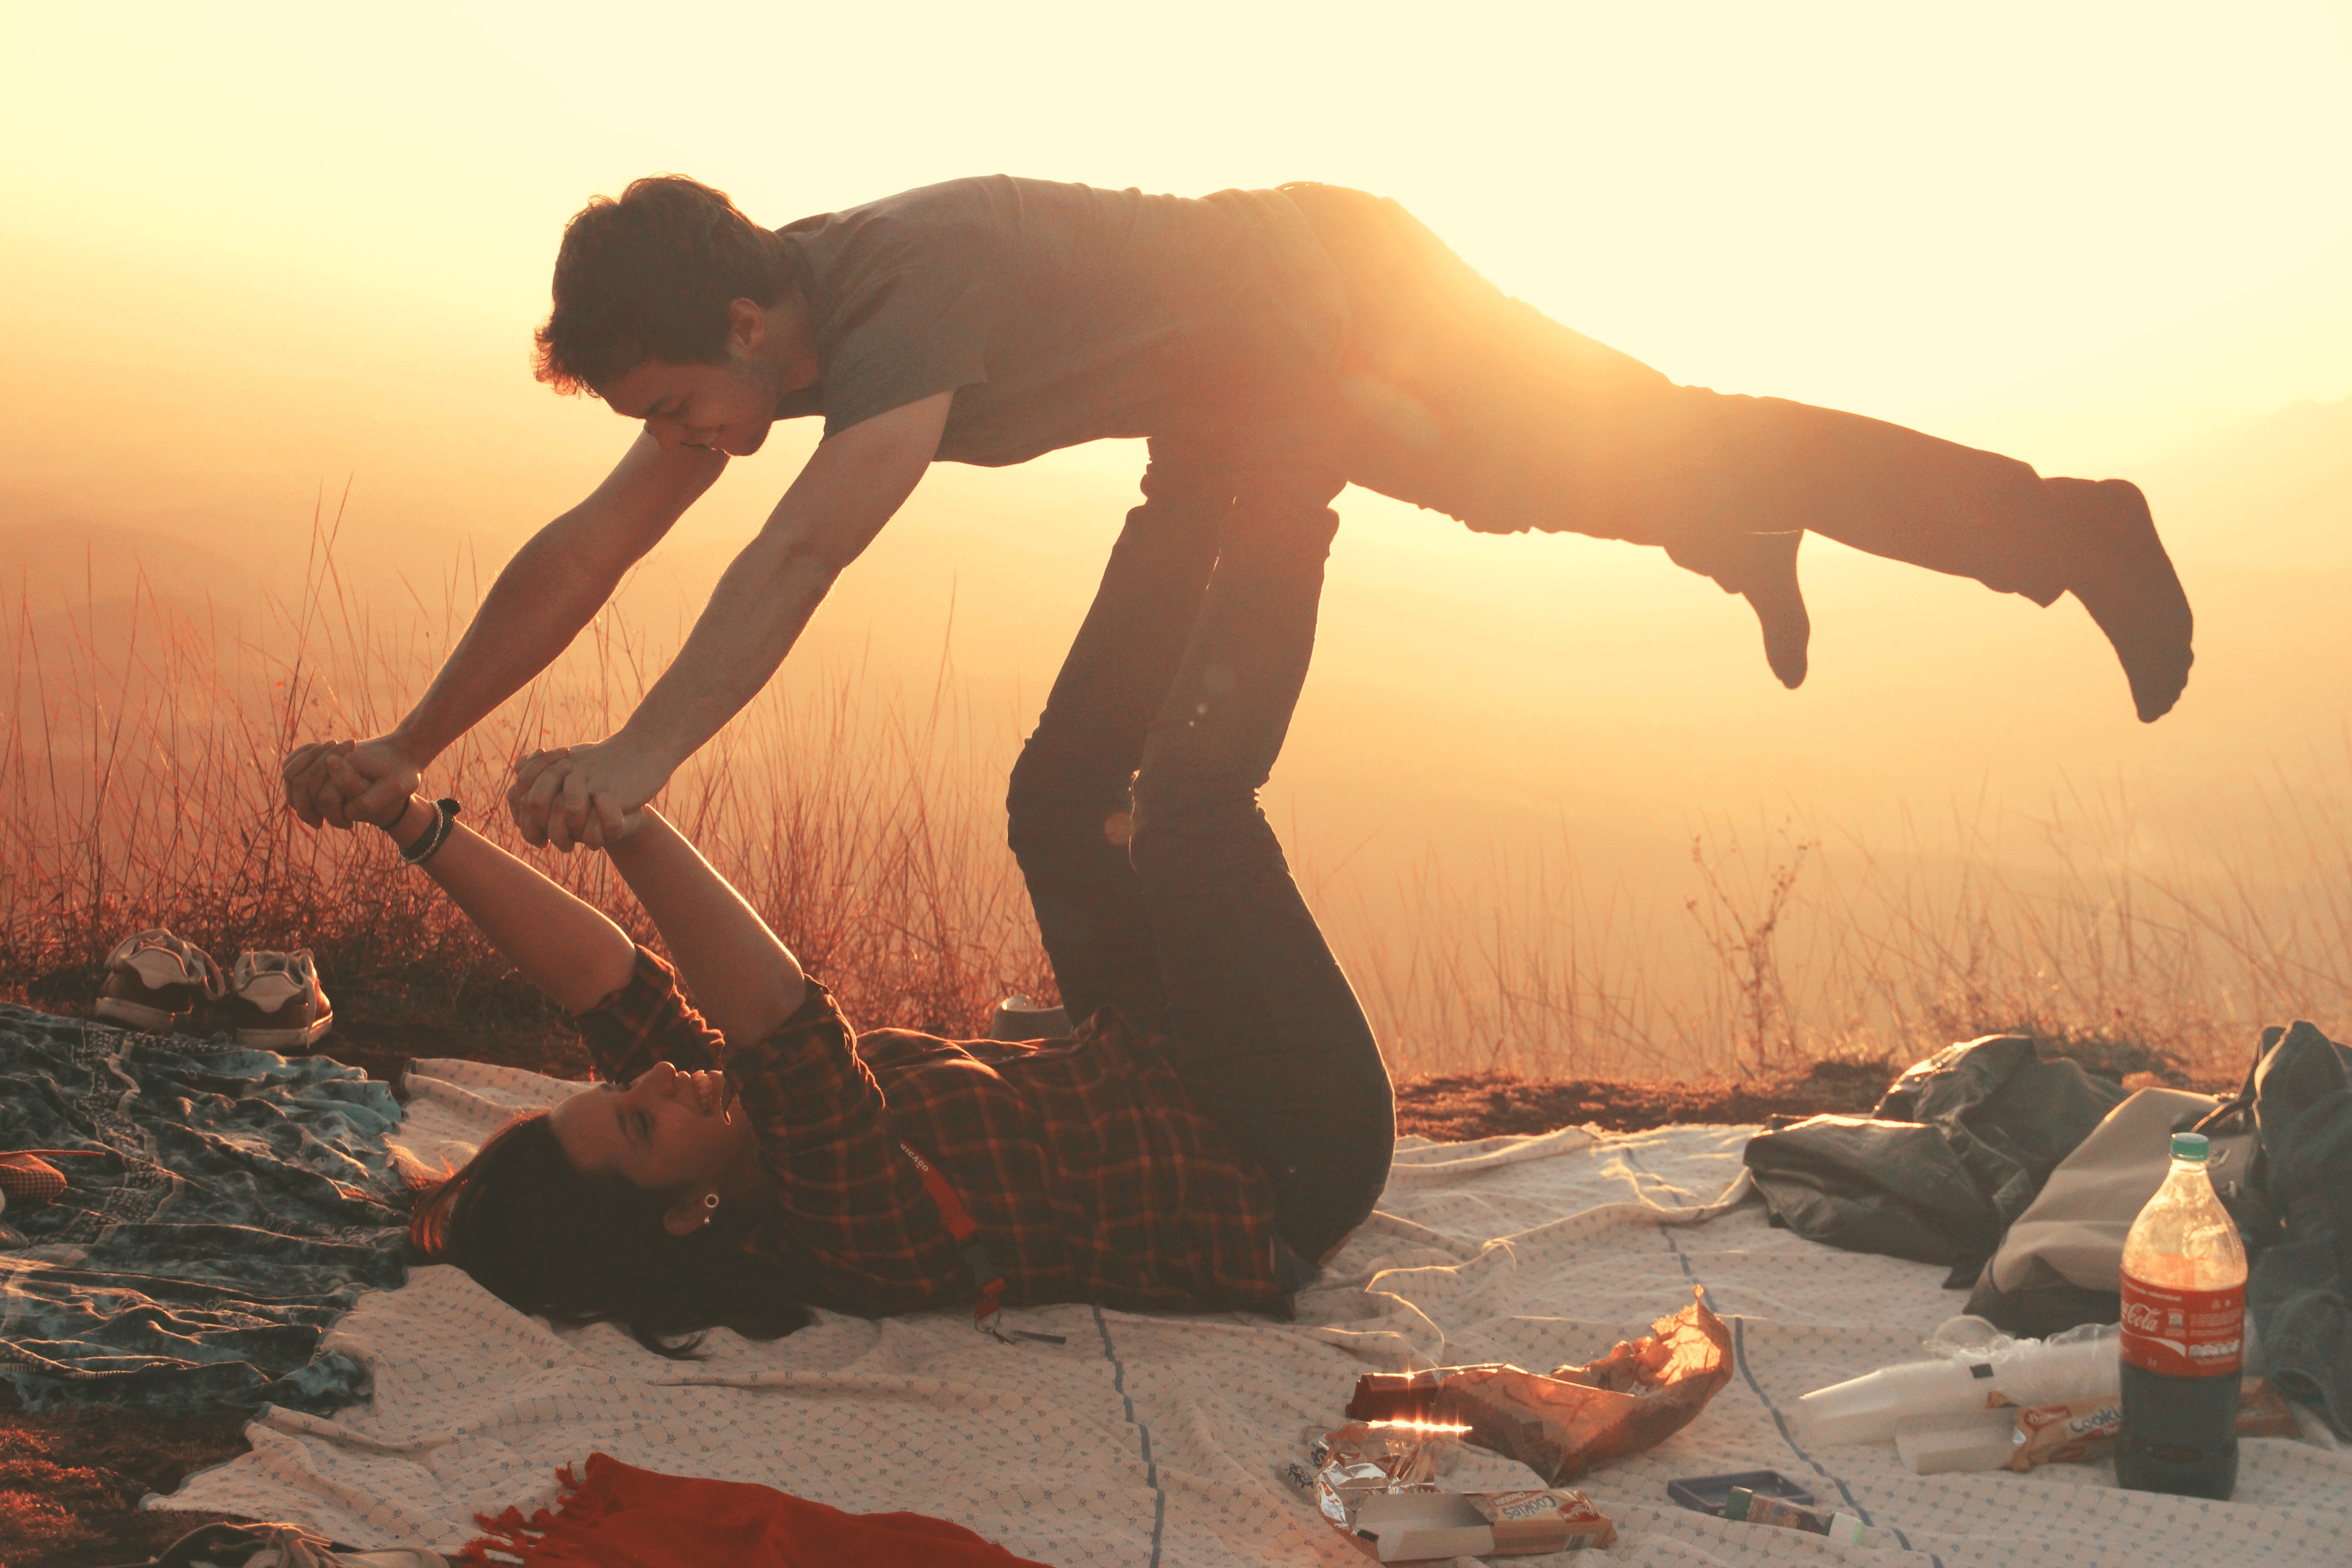 Woman lying on blanket under man on her legs holding hands during golden hour photo